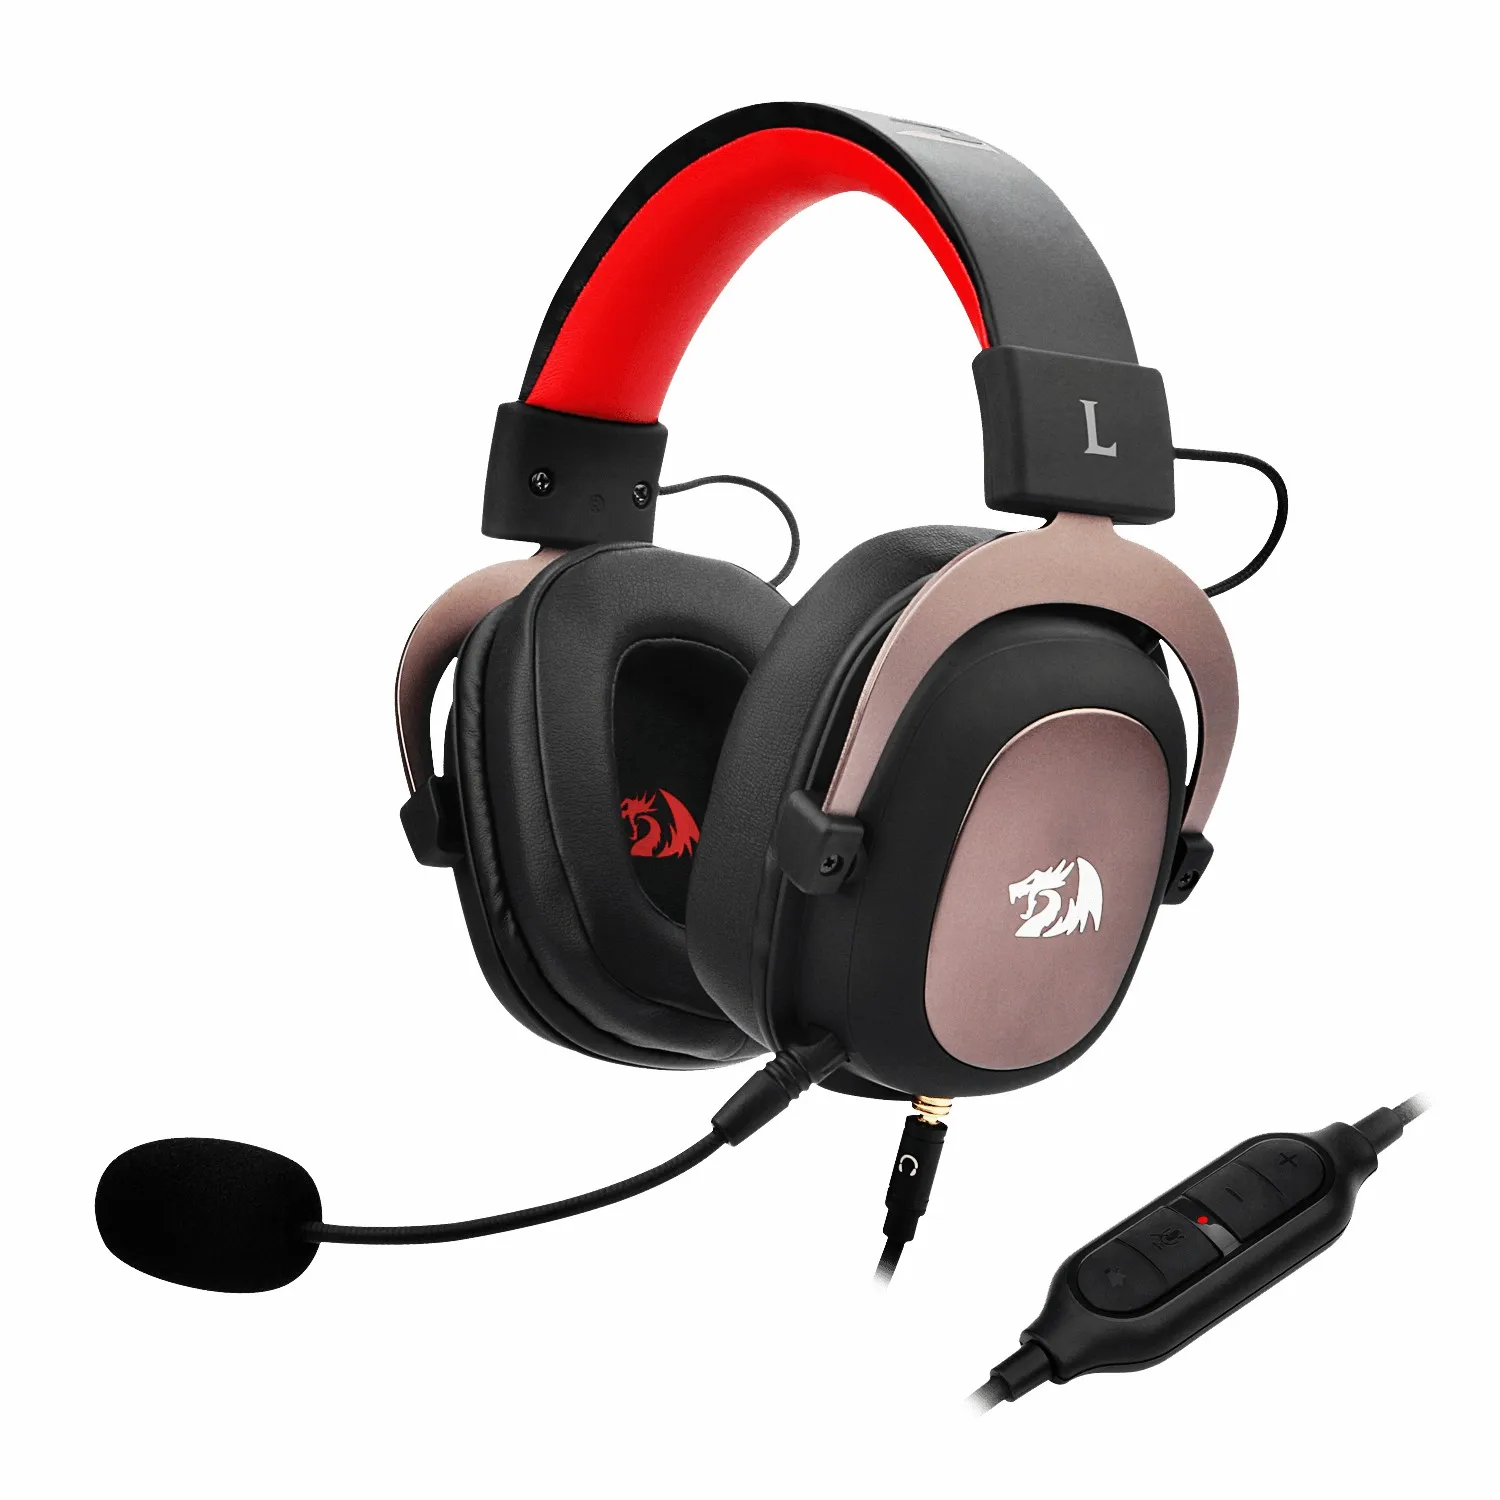 

Redragon H510 Zeus Black Noise-Cancelling Gaming Headset Headphone With Microphone For PC/PS4/XBOX